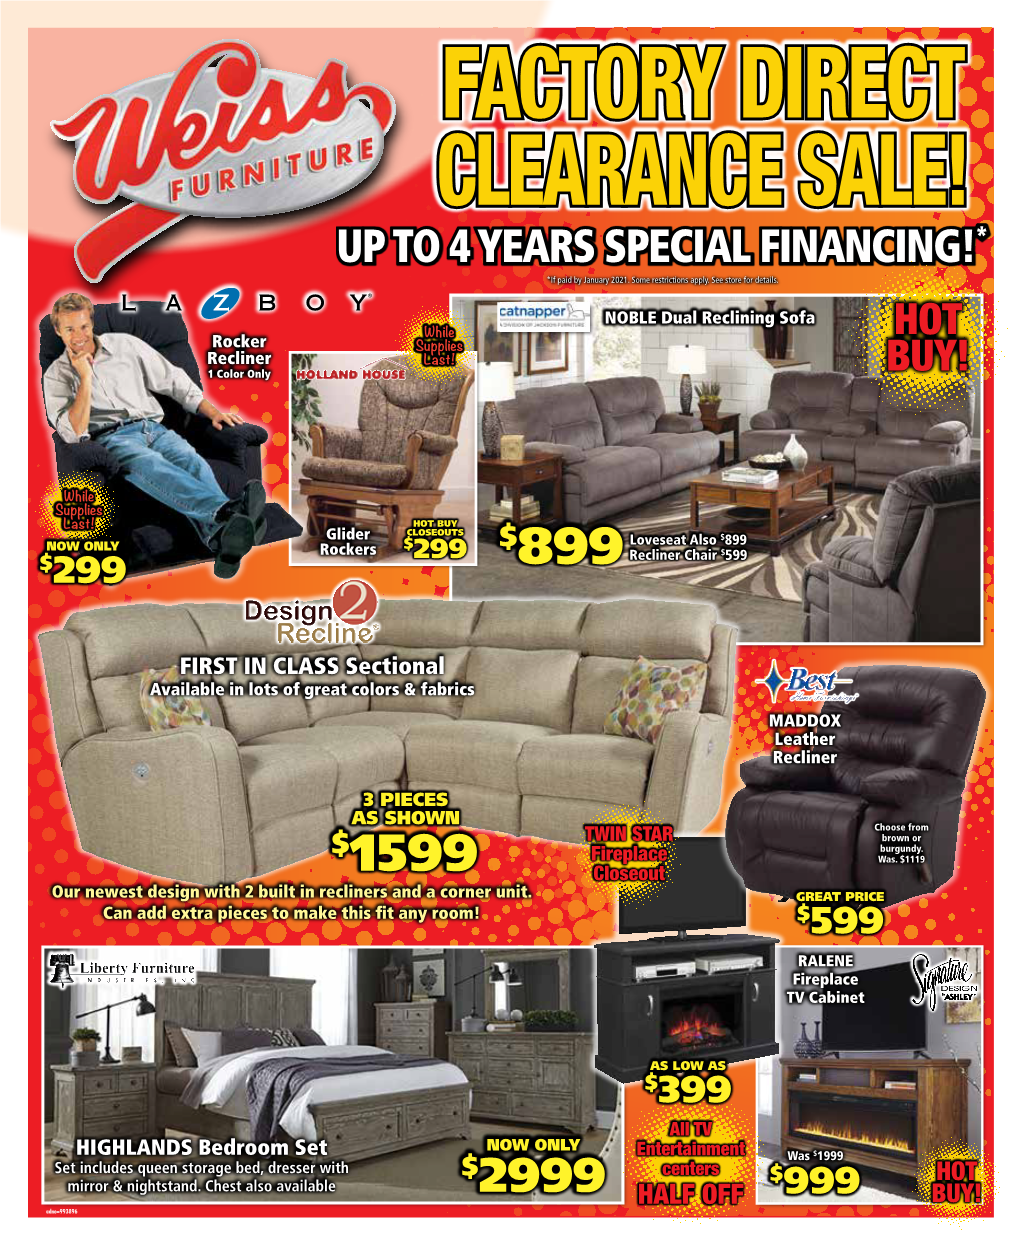 FACTORY DIRECT CLEARANCE SALE! up to 4 YEARS SPECIAL FINANCING!* *If Paid by January 2021